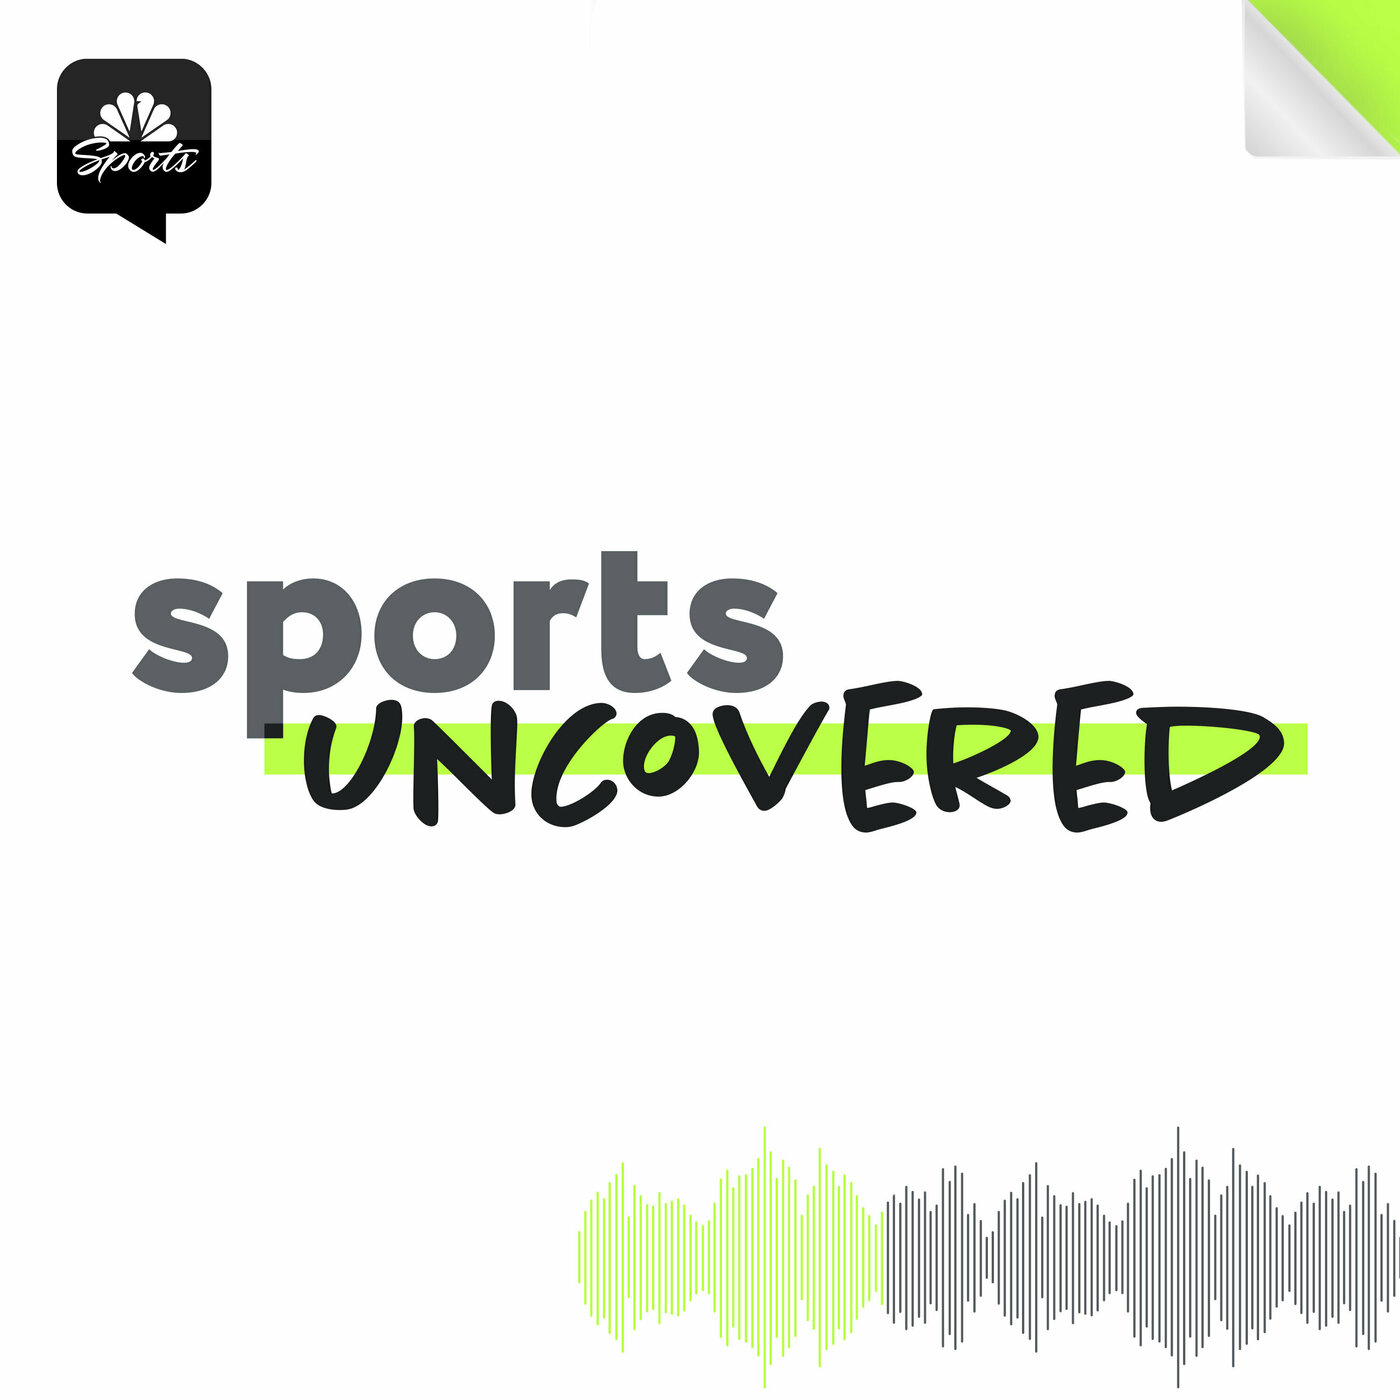 TRAILER: Mike Tirico introduces Sports Uncovered